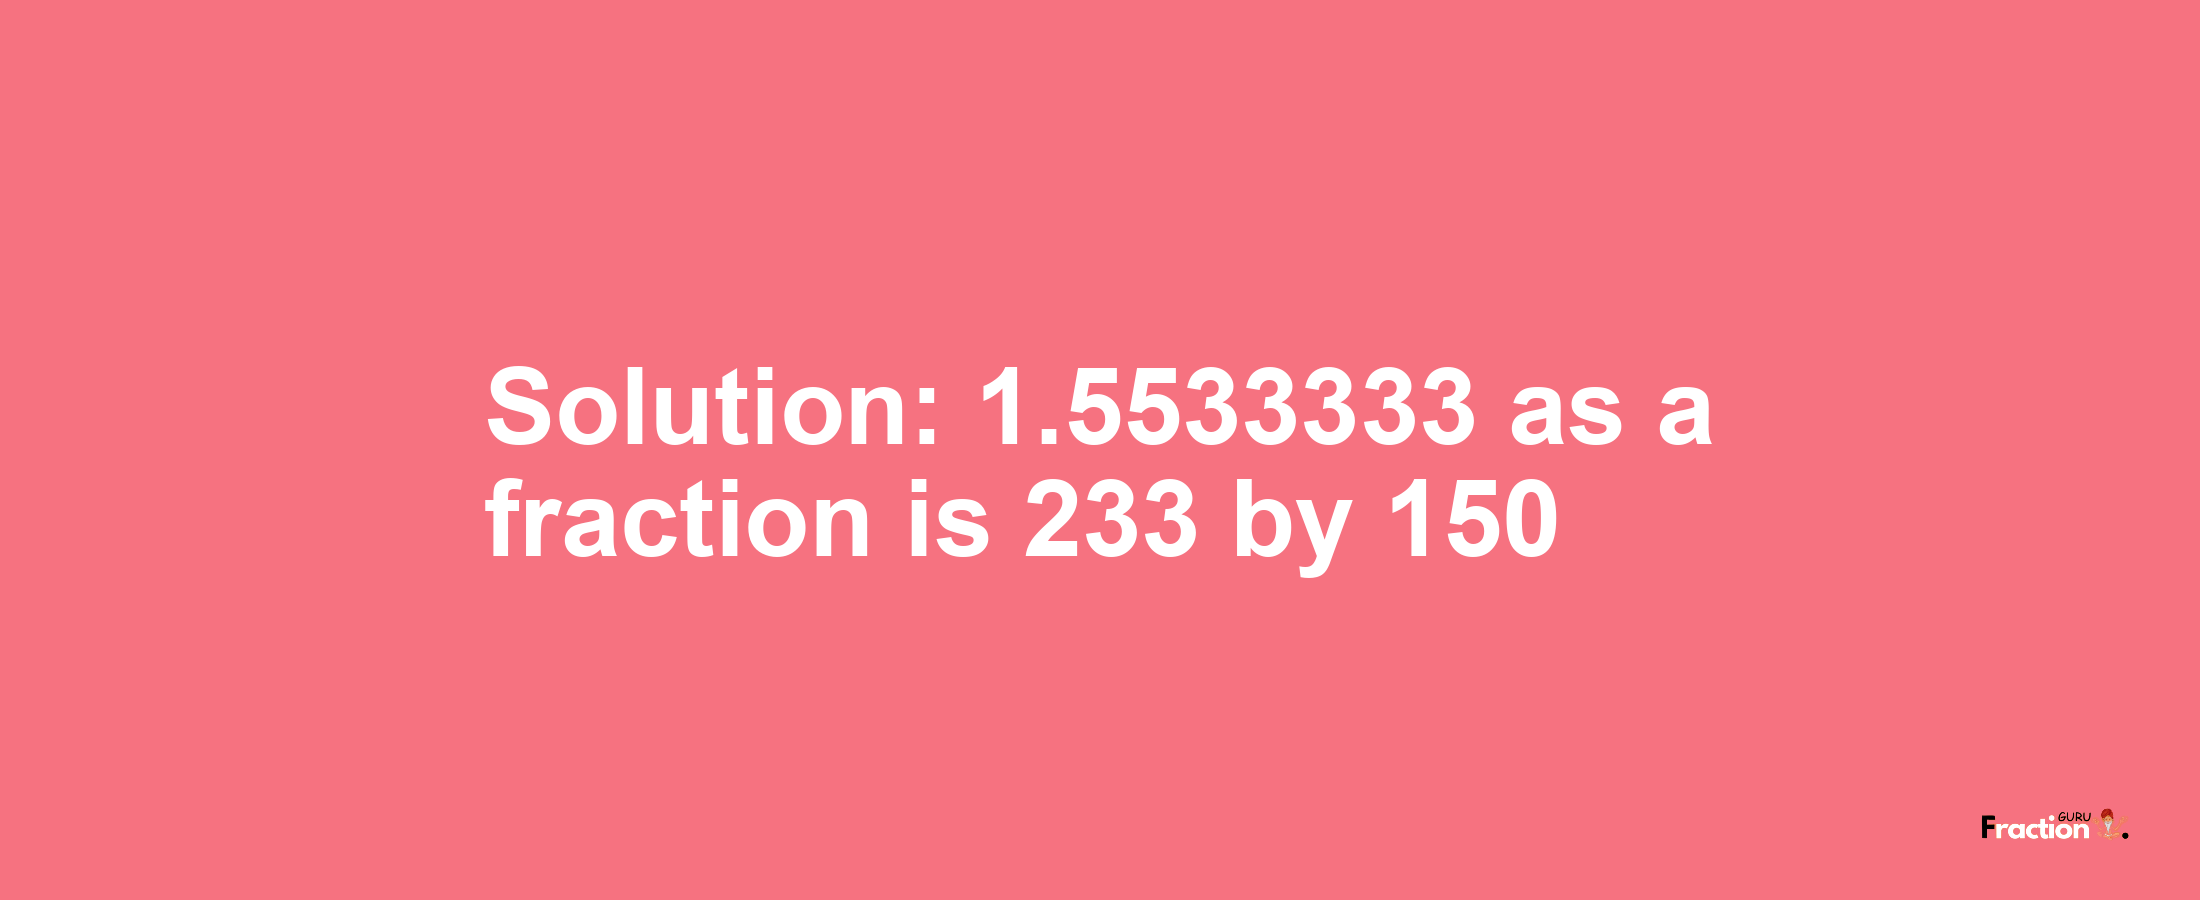 Solution:1.5533333 as a fraction is 233/150